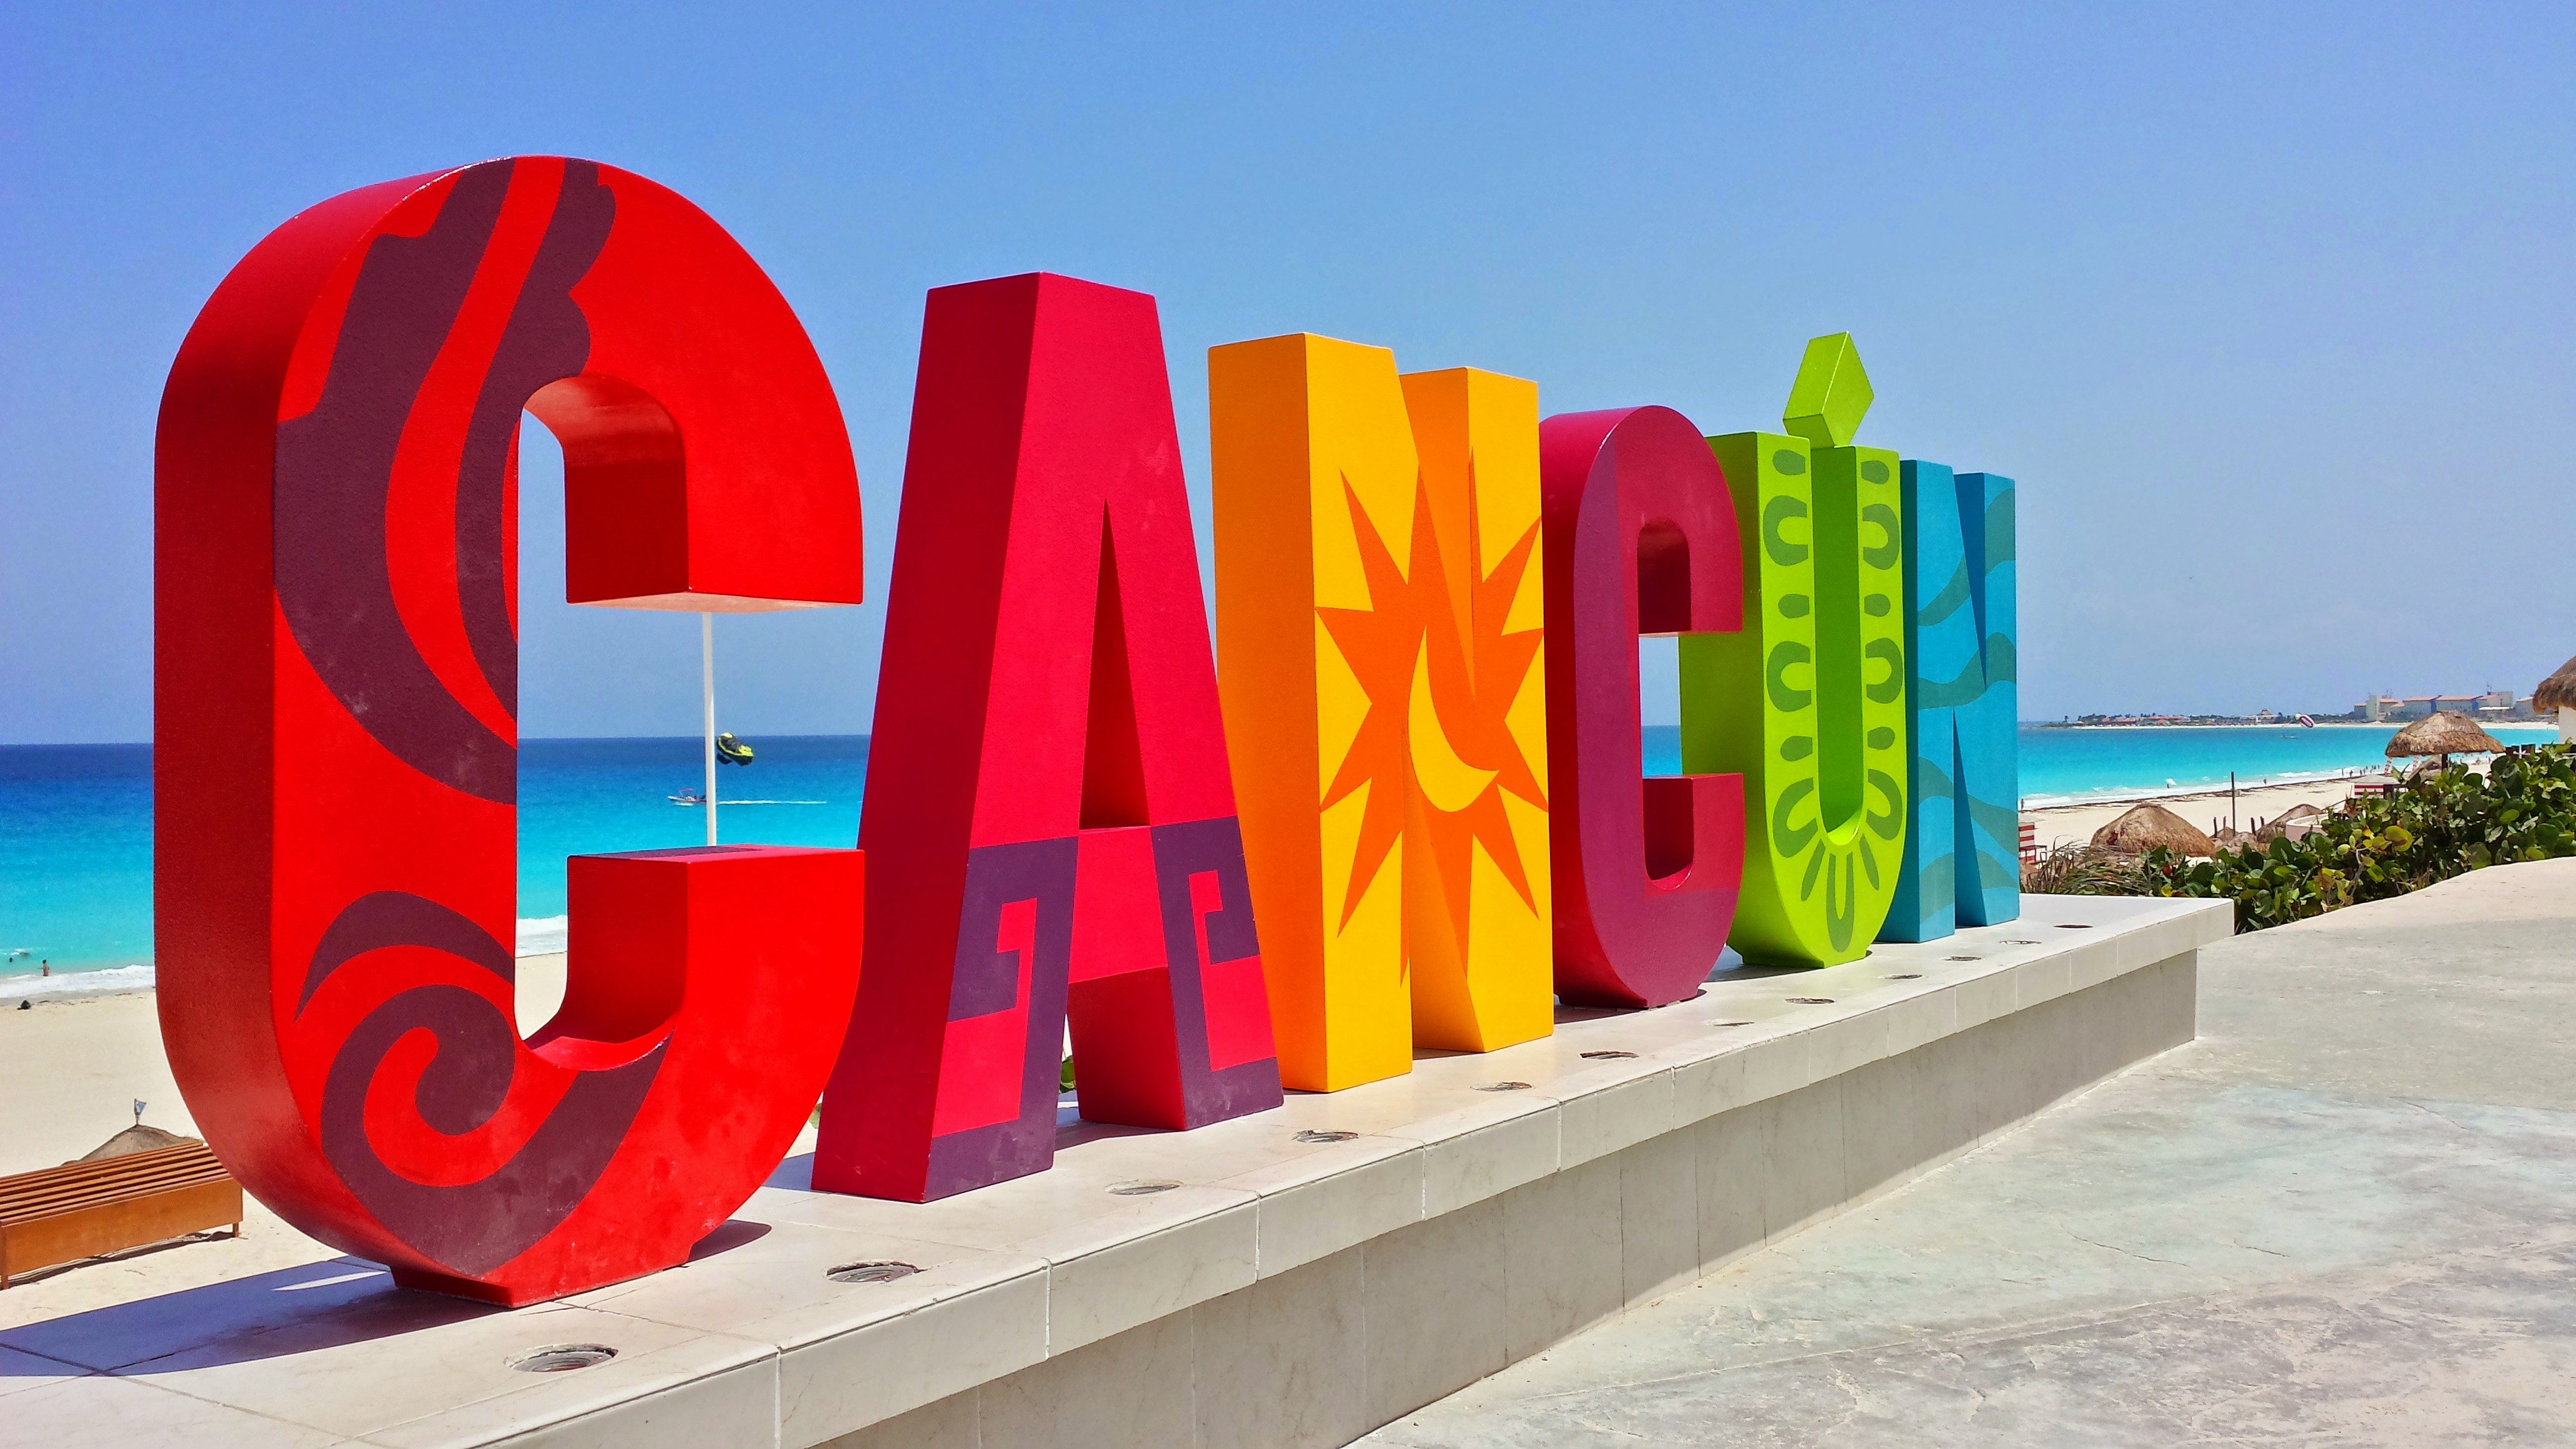 Cancun wallpapers, Man Made, HQ Cancun pictures | 4K Wallpapers 2019